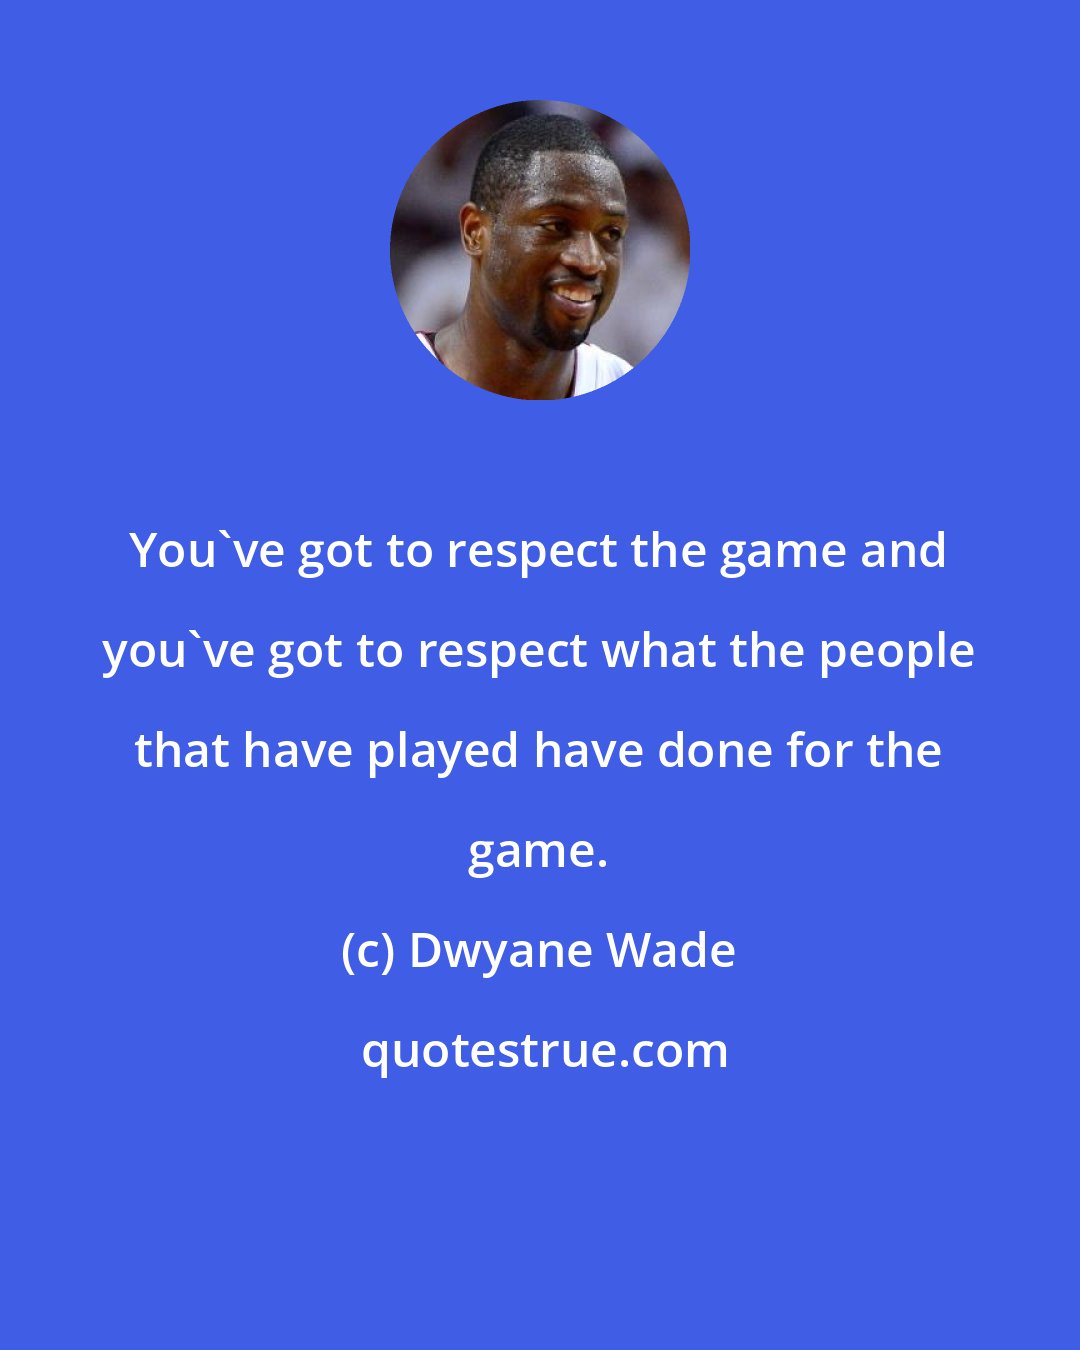 Dwyane Wade: You've got to respect the game and you've got to respect what the people that have played have done for the game.